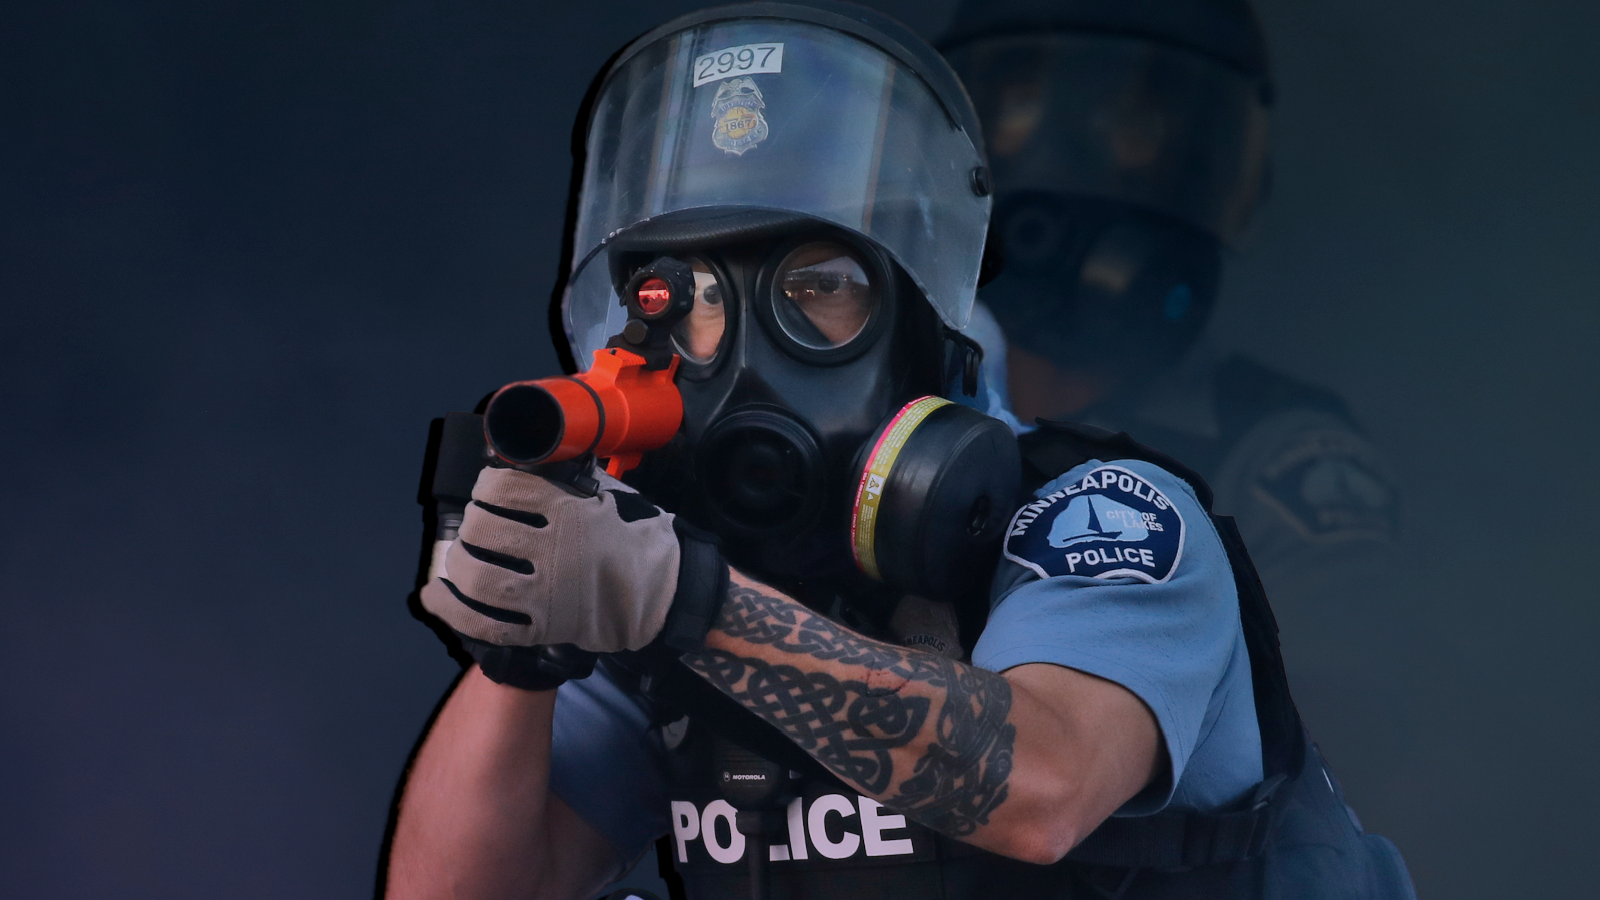 A police officer fires tear gas at protesters during a demonstration in St. Paul, Minn, in 2020.